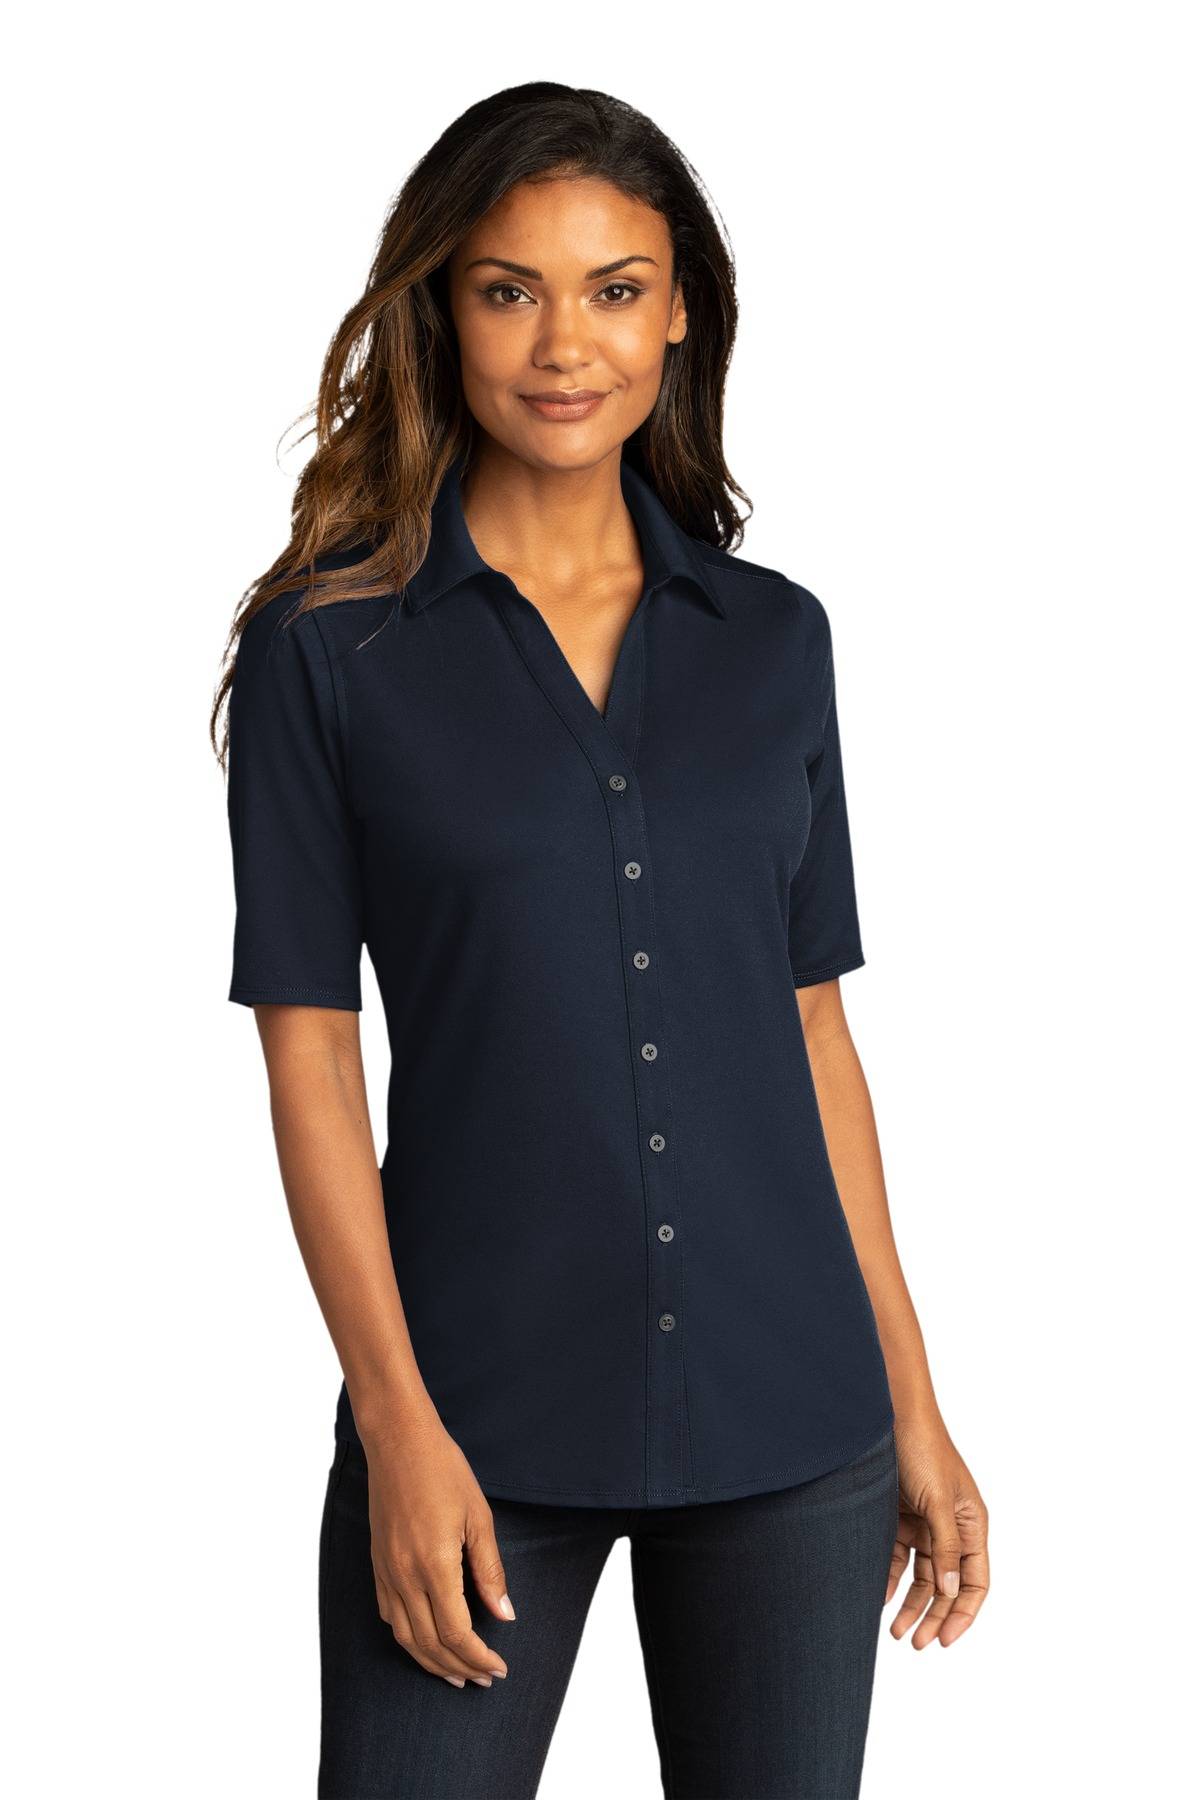 Port Authority LK682 Womens Short Sleeve Moisture Wicking Snag Resistant City Stretch Y Neck Stylish Top